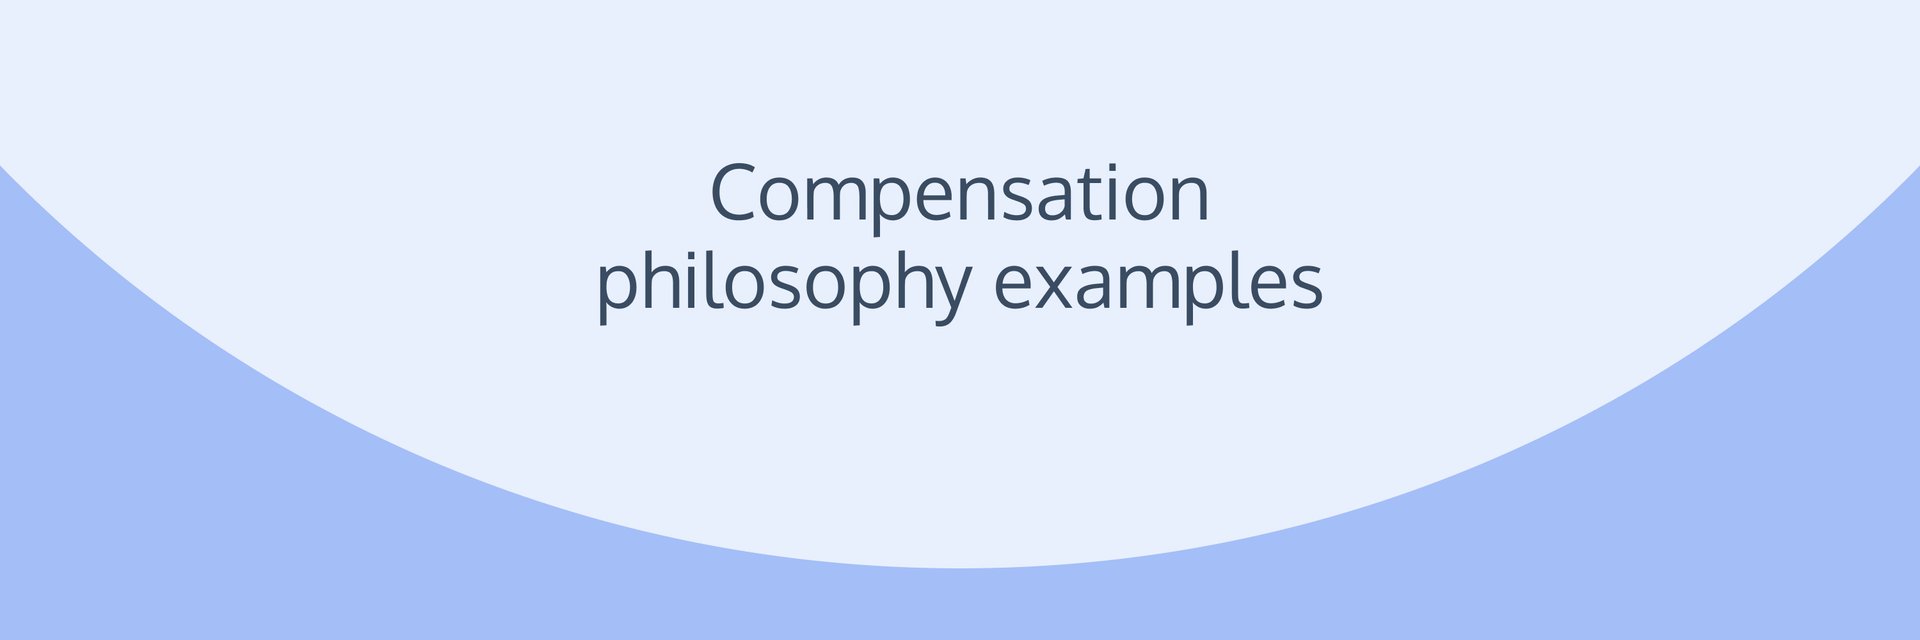 Compensation philosophy examples